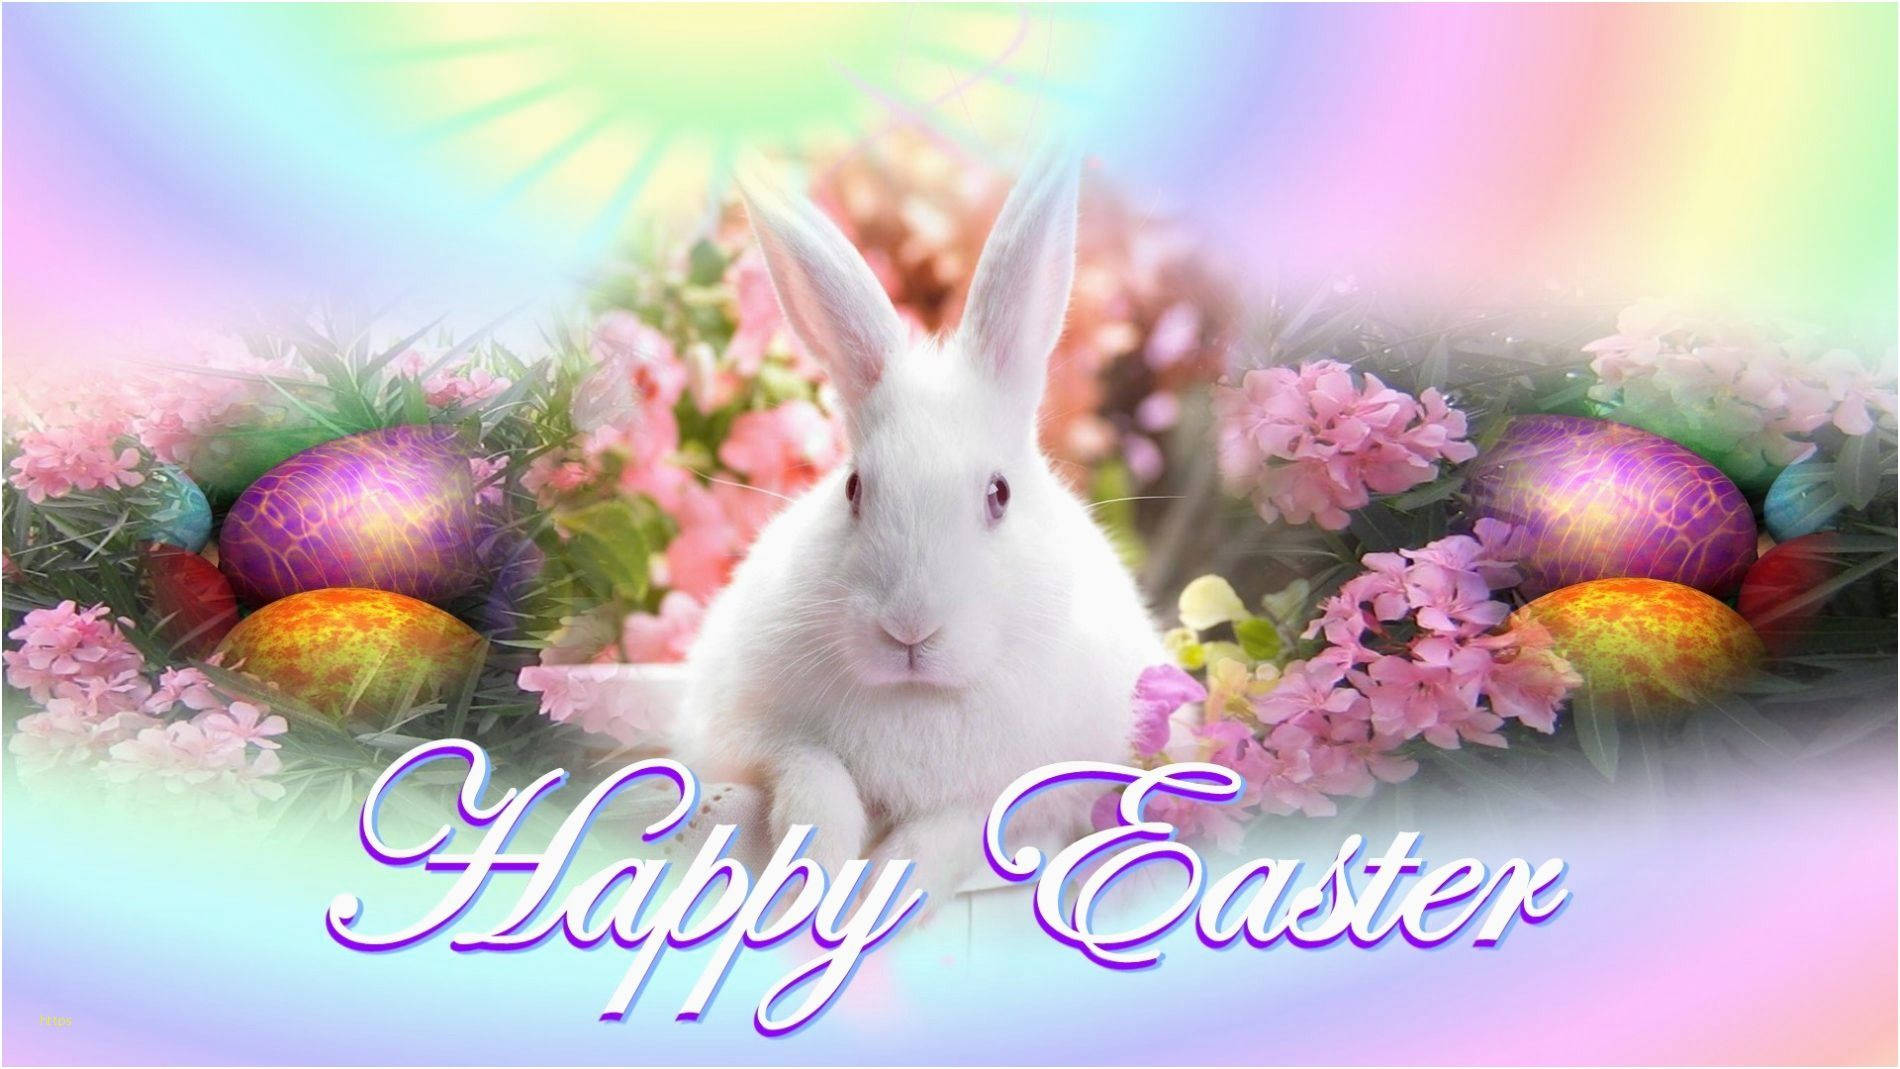 Happy Easter Real White Rabbit Greeting Card Wallpaper